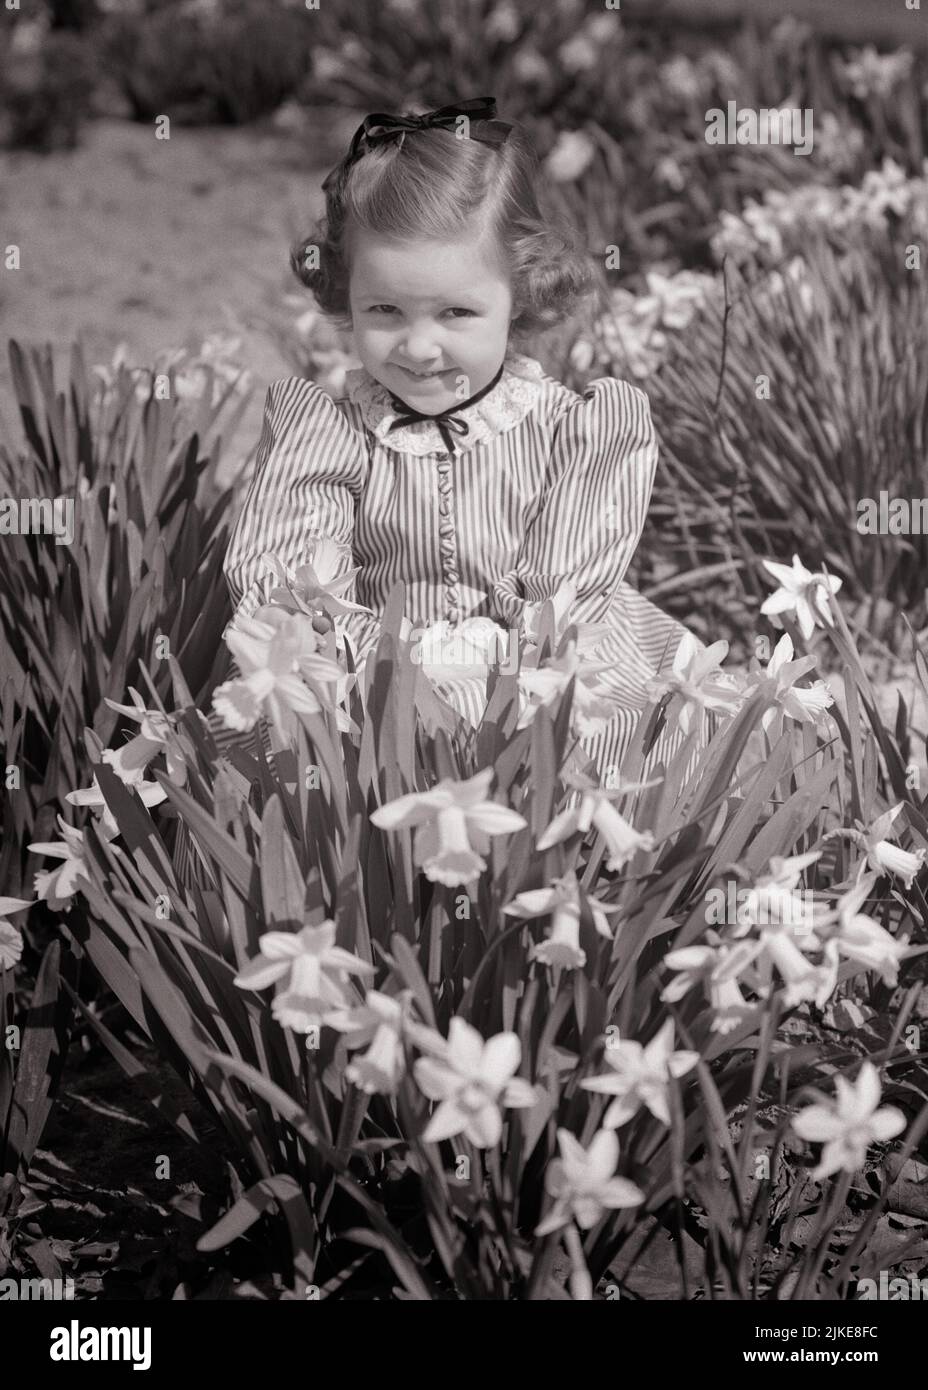 1940s 1950s LITTLE GIRL IN STRIPED DRESS IN FLOWER FIELD FULL OF SPRING DAFFODILS SQUINTING LOOKING AT CAMERA - j814 HAR001 HARS NATURE COPY SPACE HALF-LENGTH STRIPES B&W EYE CONTACT HAPPINESS CHEERFUL HIGH ANGLE SQUINTING DAFFODILS SMILES JOYFUL STYLISH PLEASANT AGREEABLE CHARMING GROWTH JUVENILES LOVABLE PLEASING SPRINGTIME YOUNGSTER ADORABLE APPEALING BLACK AND WHITE CAUCASIAN ETHNICITY HAR001 OLD FASHIONED Stock Photo